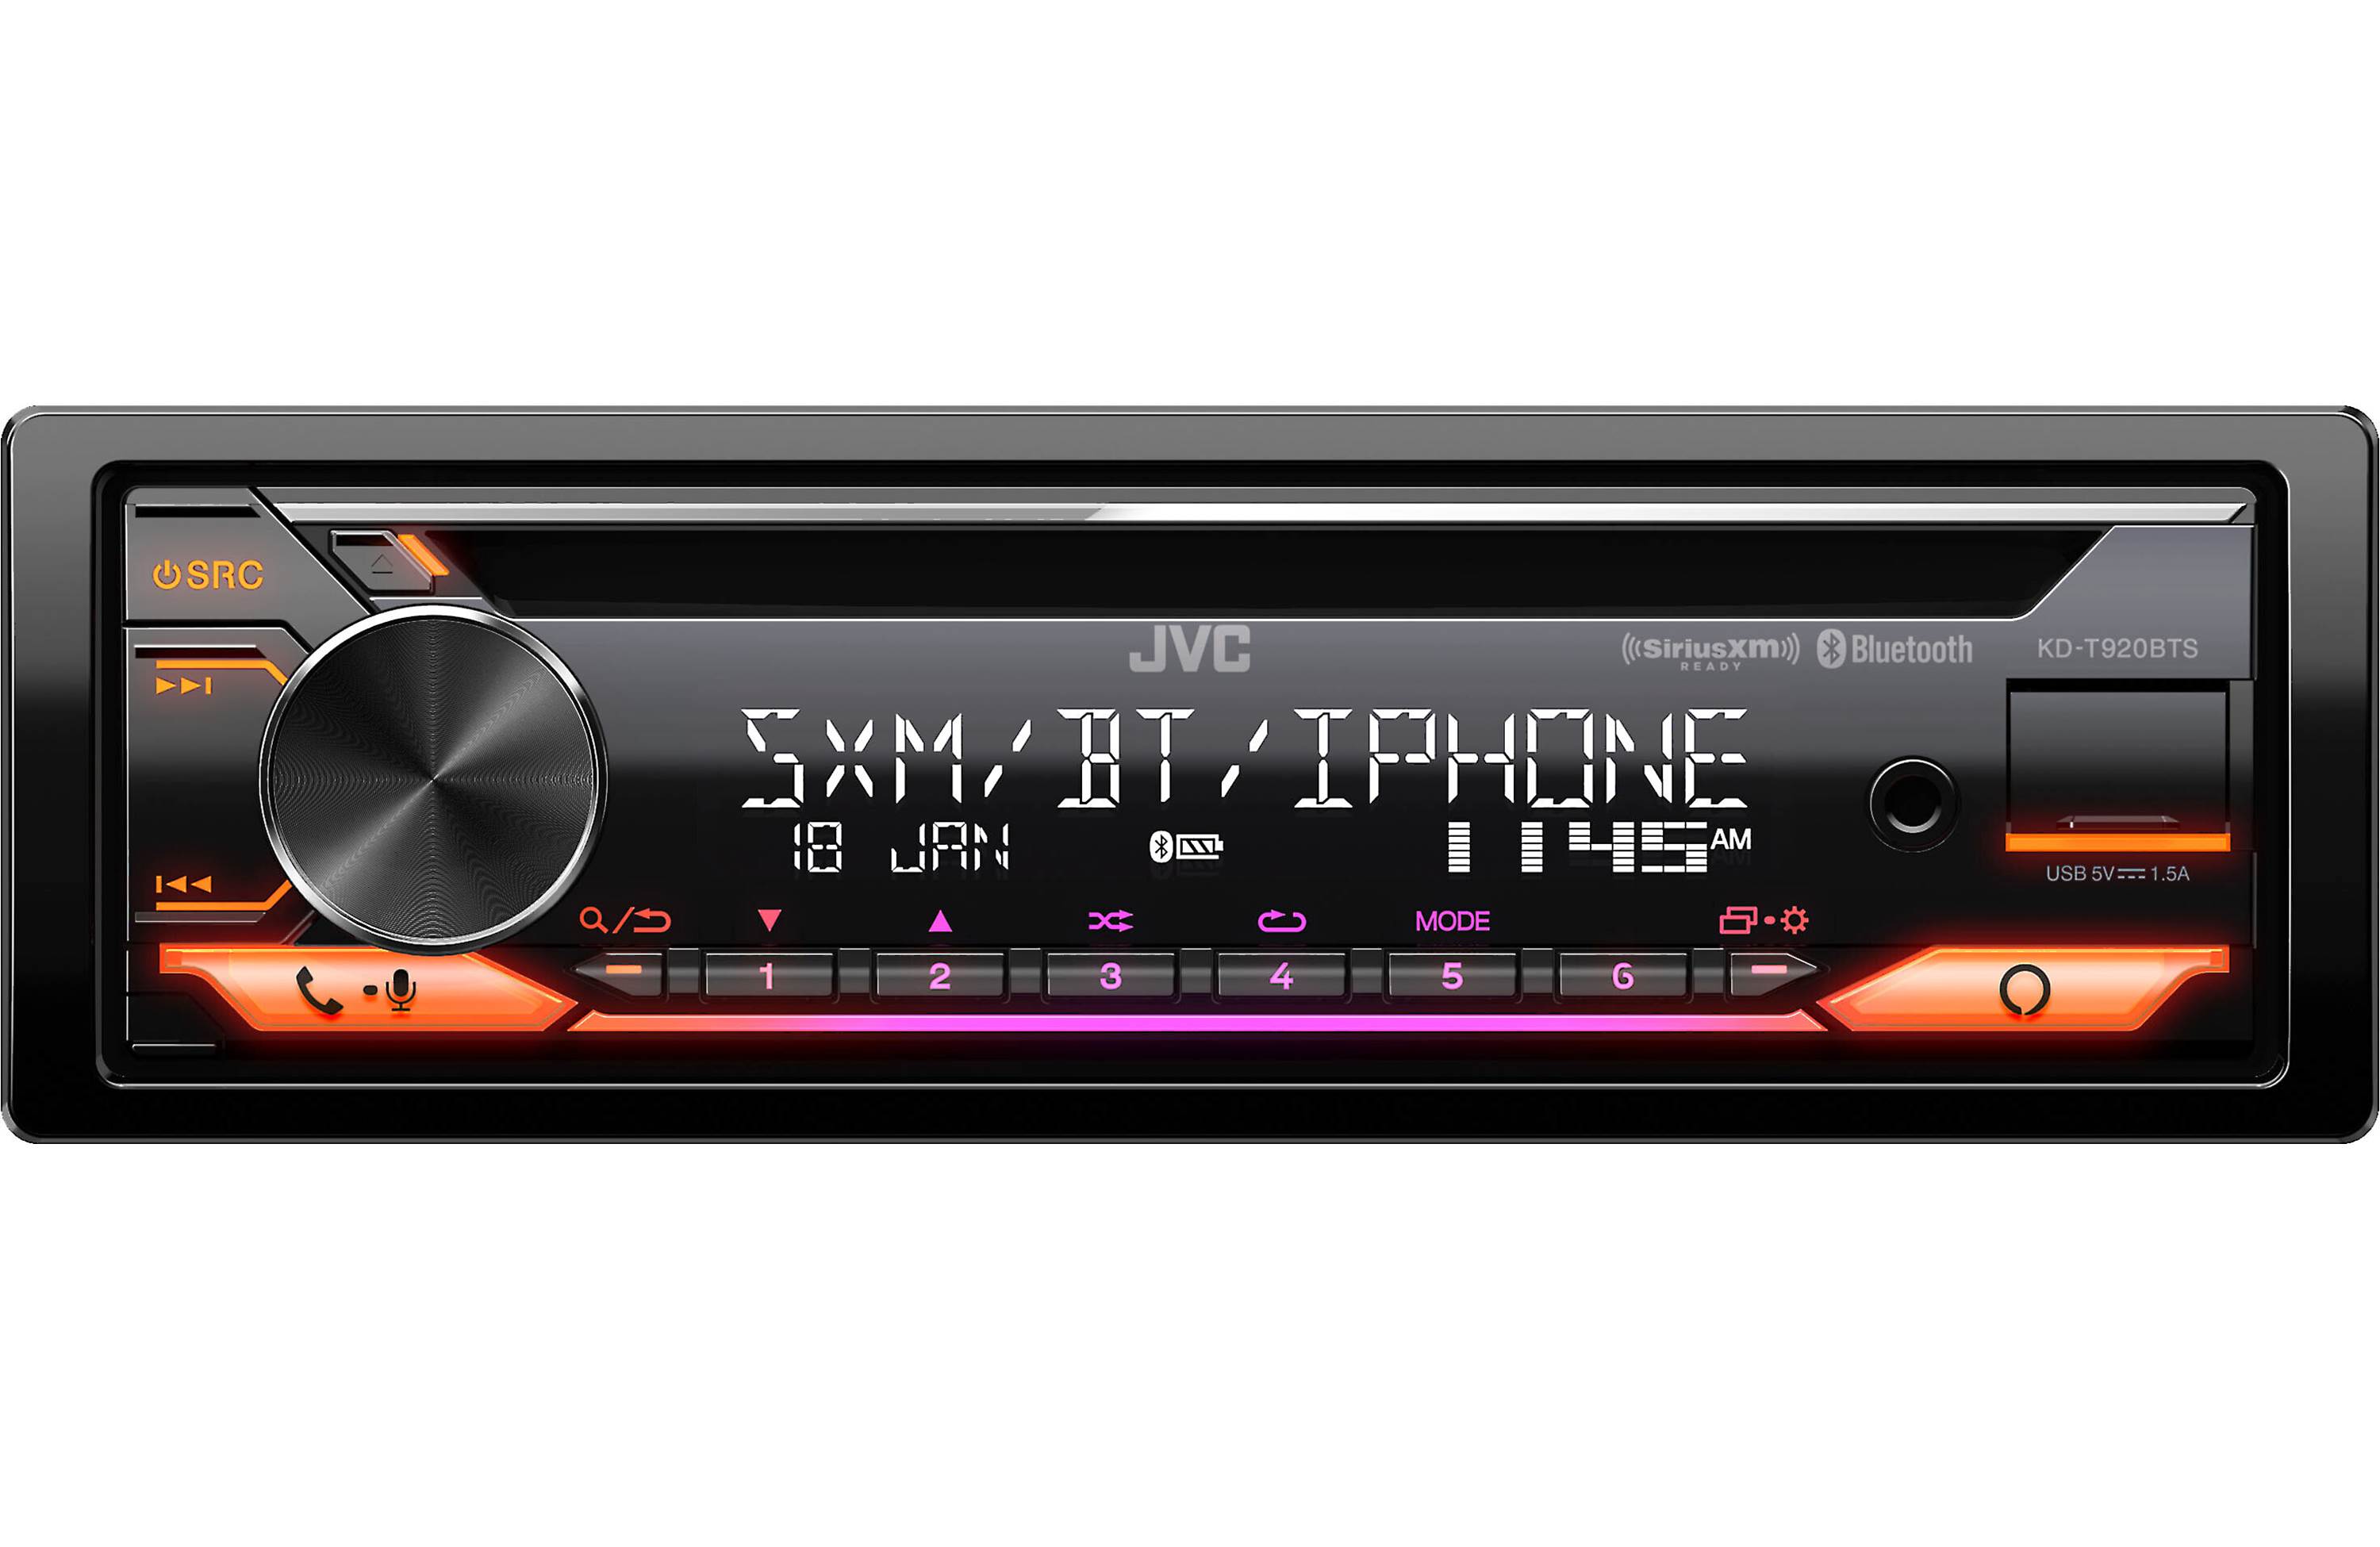 JVC KD-T920BTS CD receiver with AM/FM tuner built-in Bluetooth